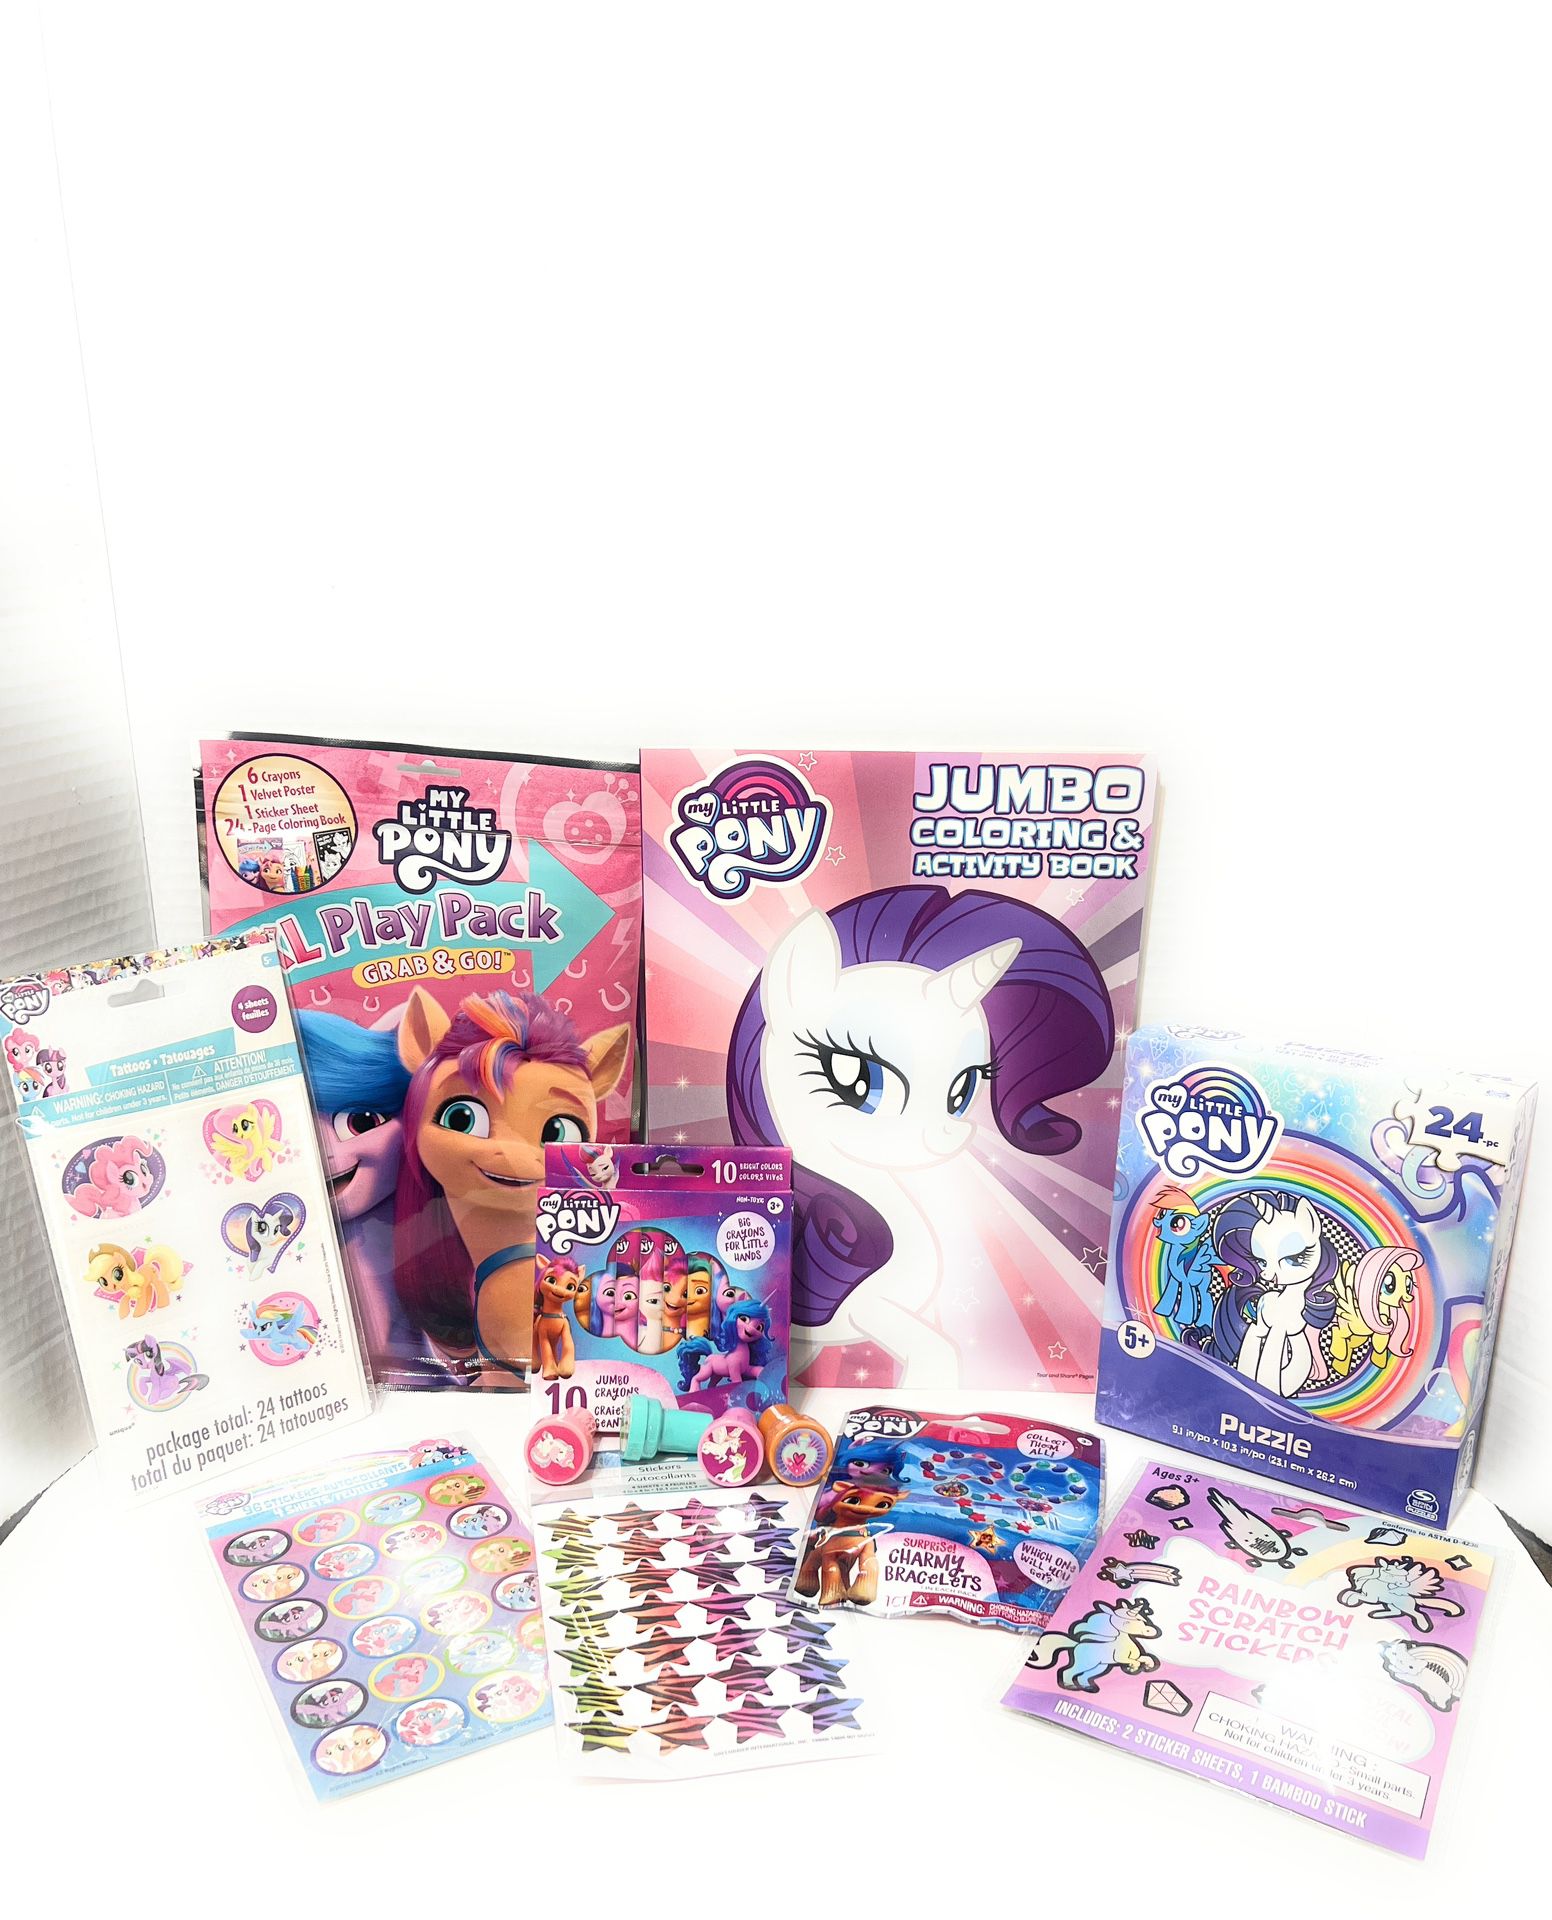 My Little Pony Coloring Activity Book Set With Crayons, Tattoos, Puzzle, And More